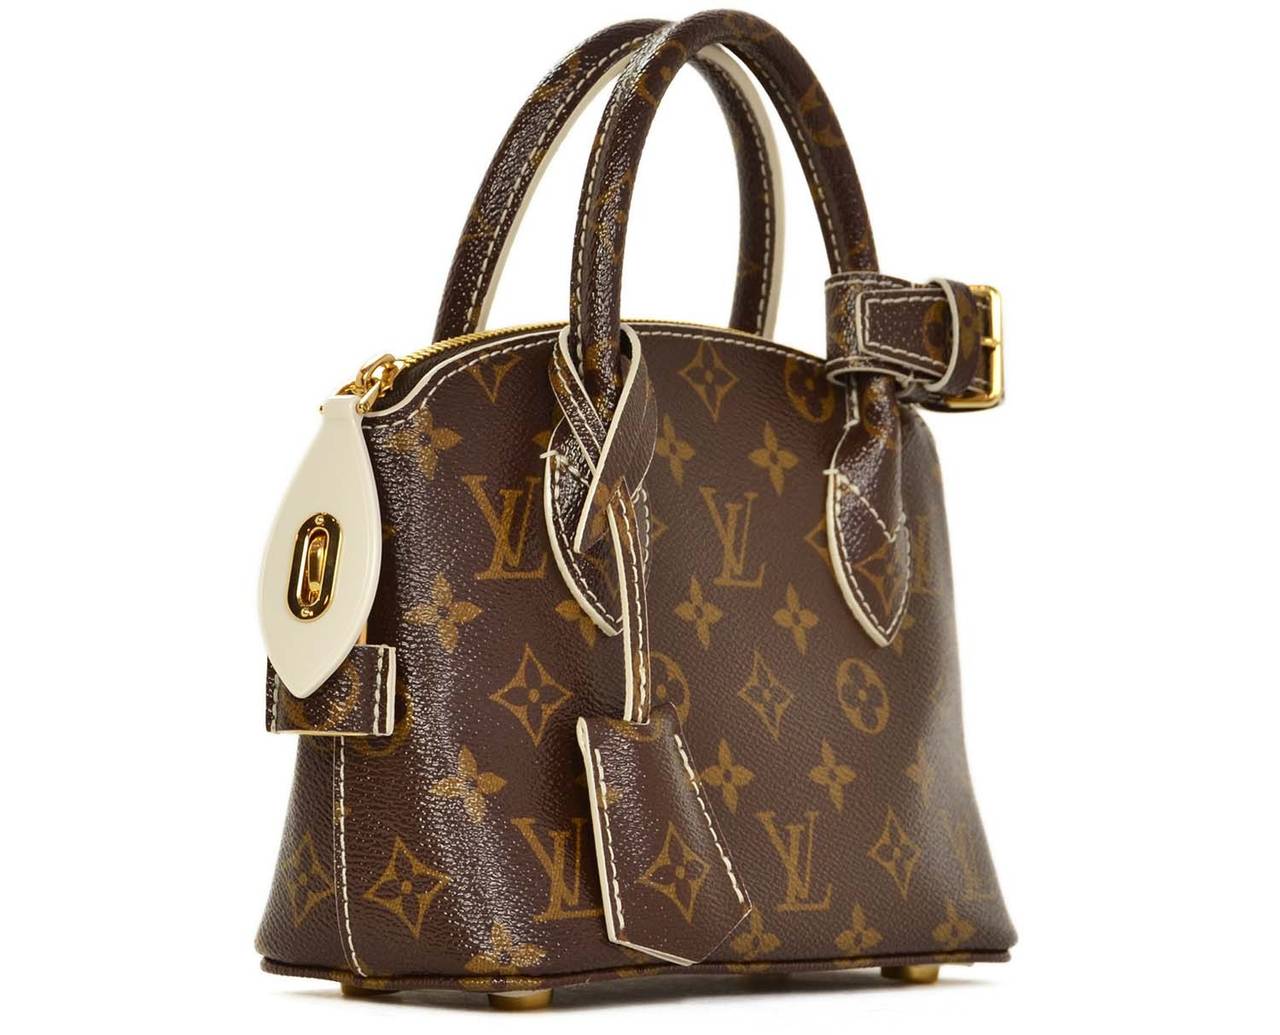 Louis Vuitton Monogram FETISH LOCKIT BB Bag
Age: c. 2011
Made in France
Materials: coated canvas, resin, goldtone meta.
lnterior slip pocket
Top zipper closure with white resin zipper pull
Strap for attachment to luggage
Blind date stamp: